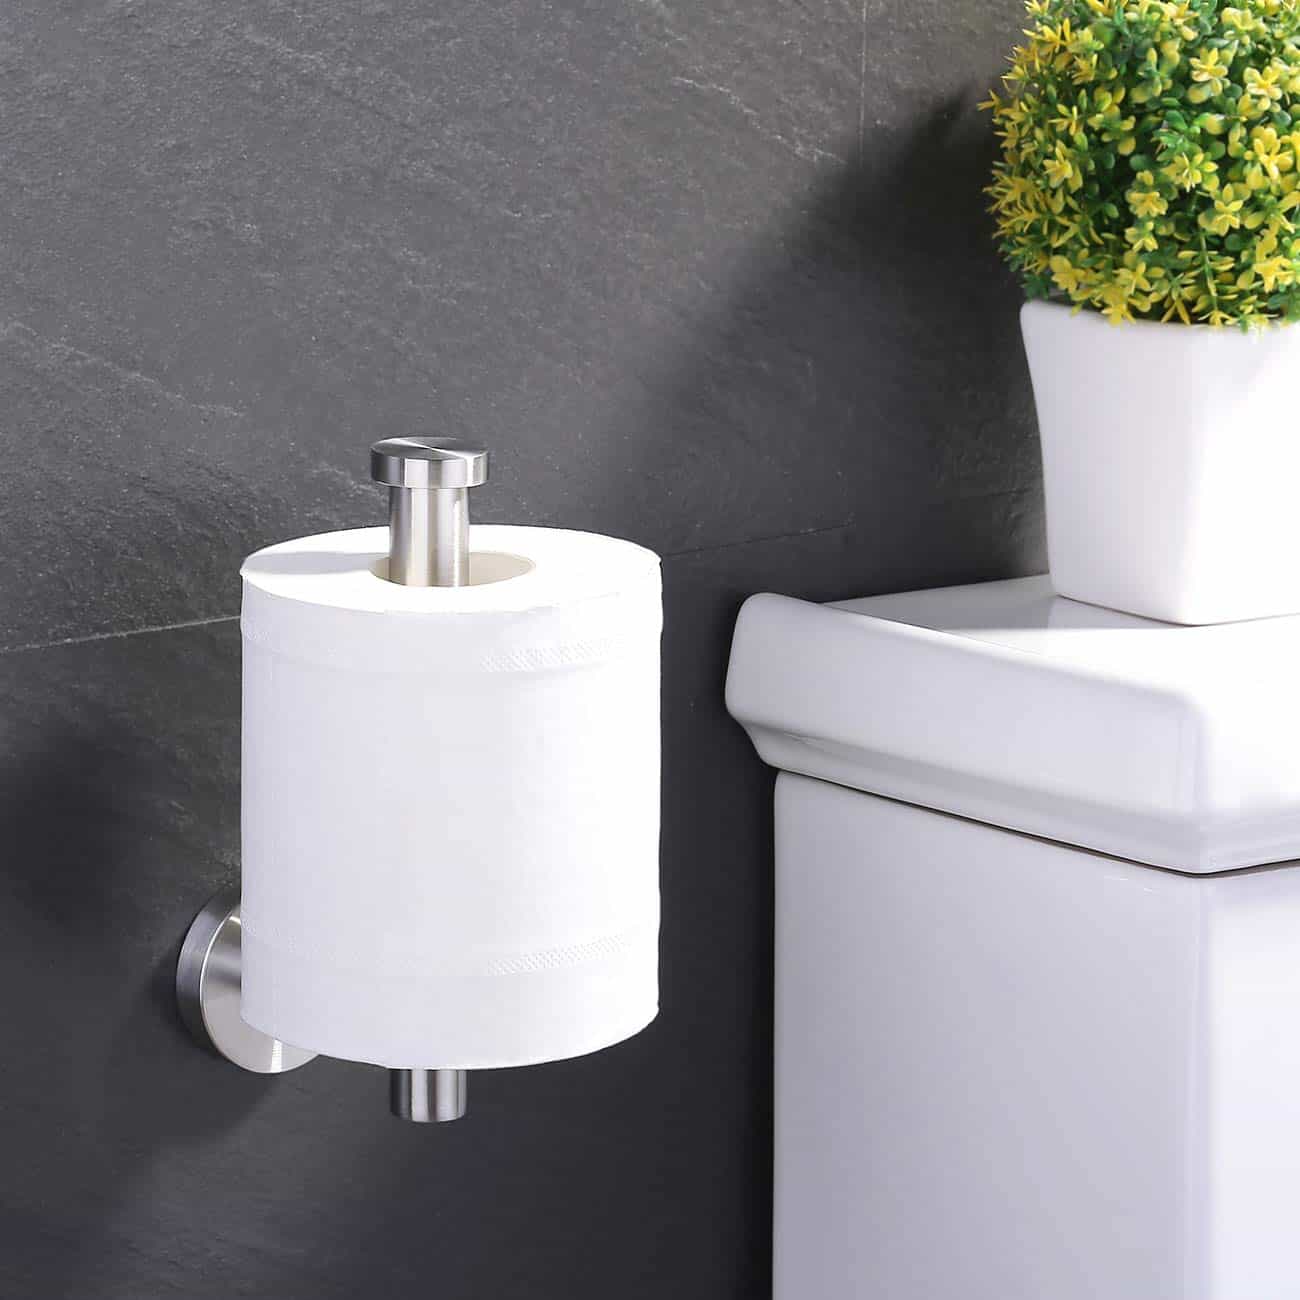 Where To Put Toilet Paper Holder